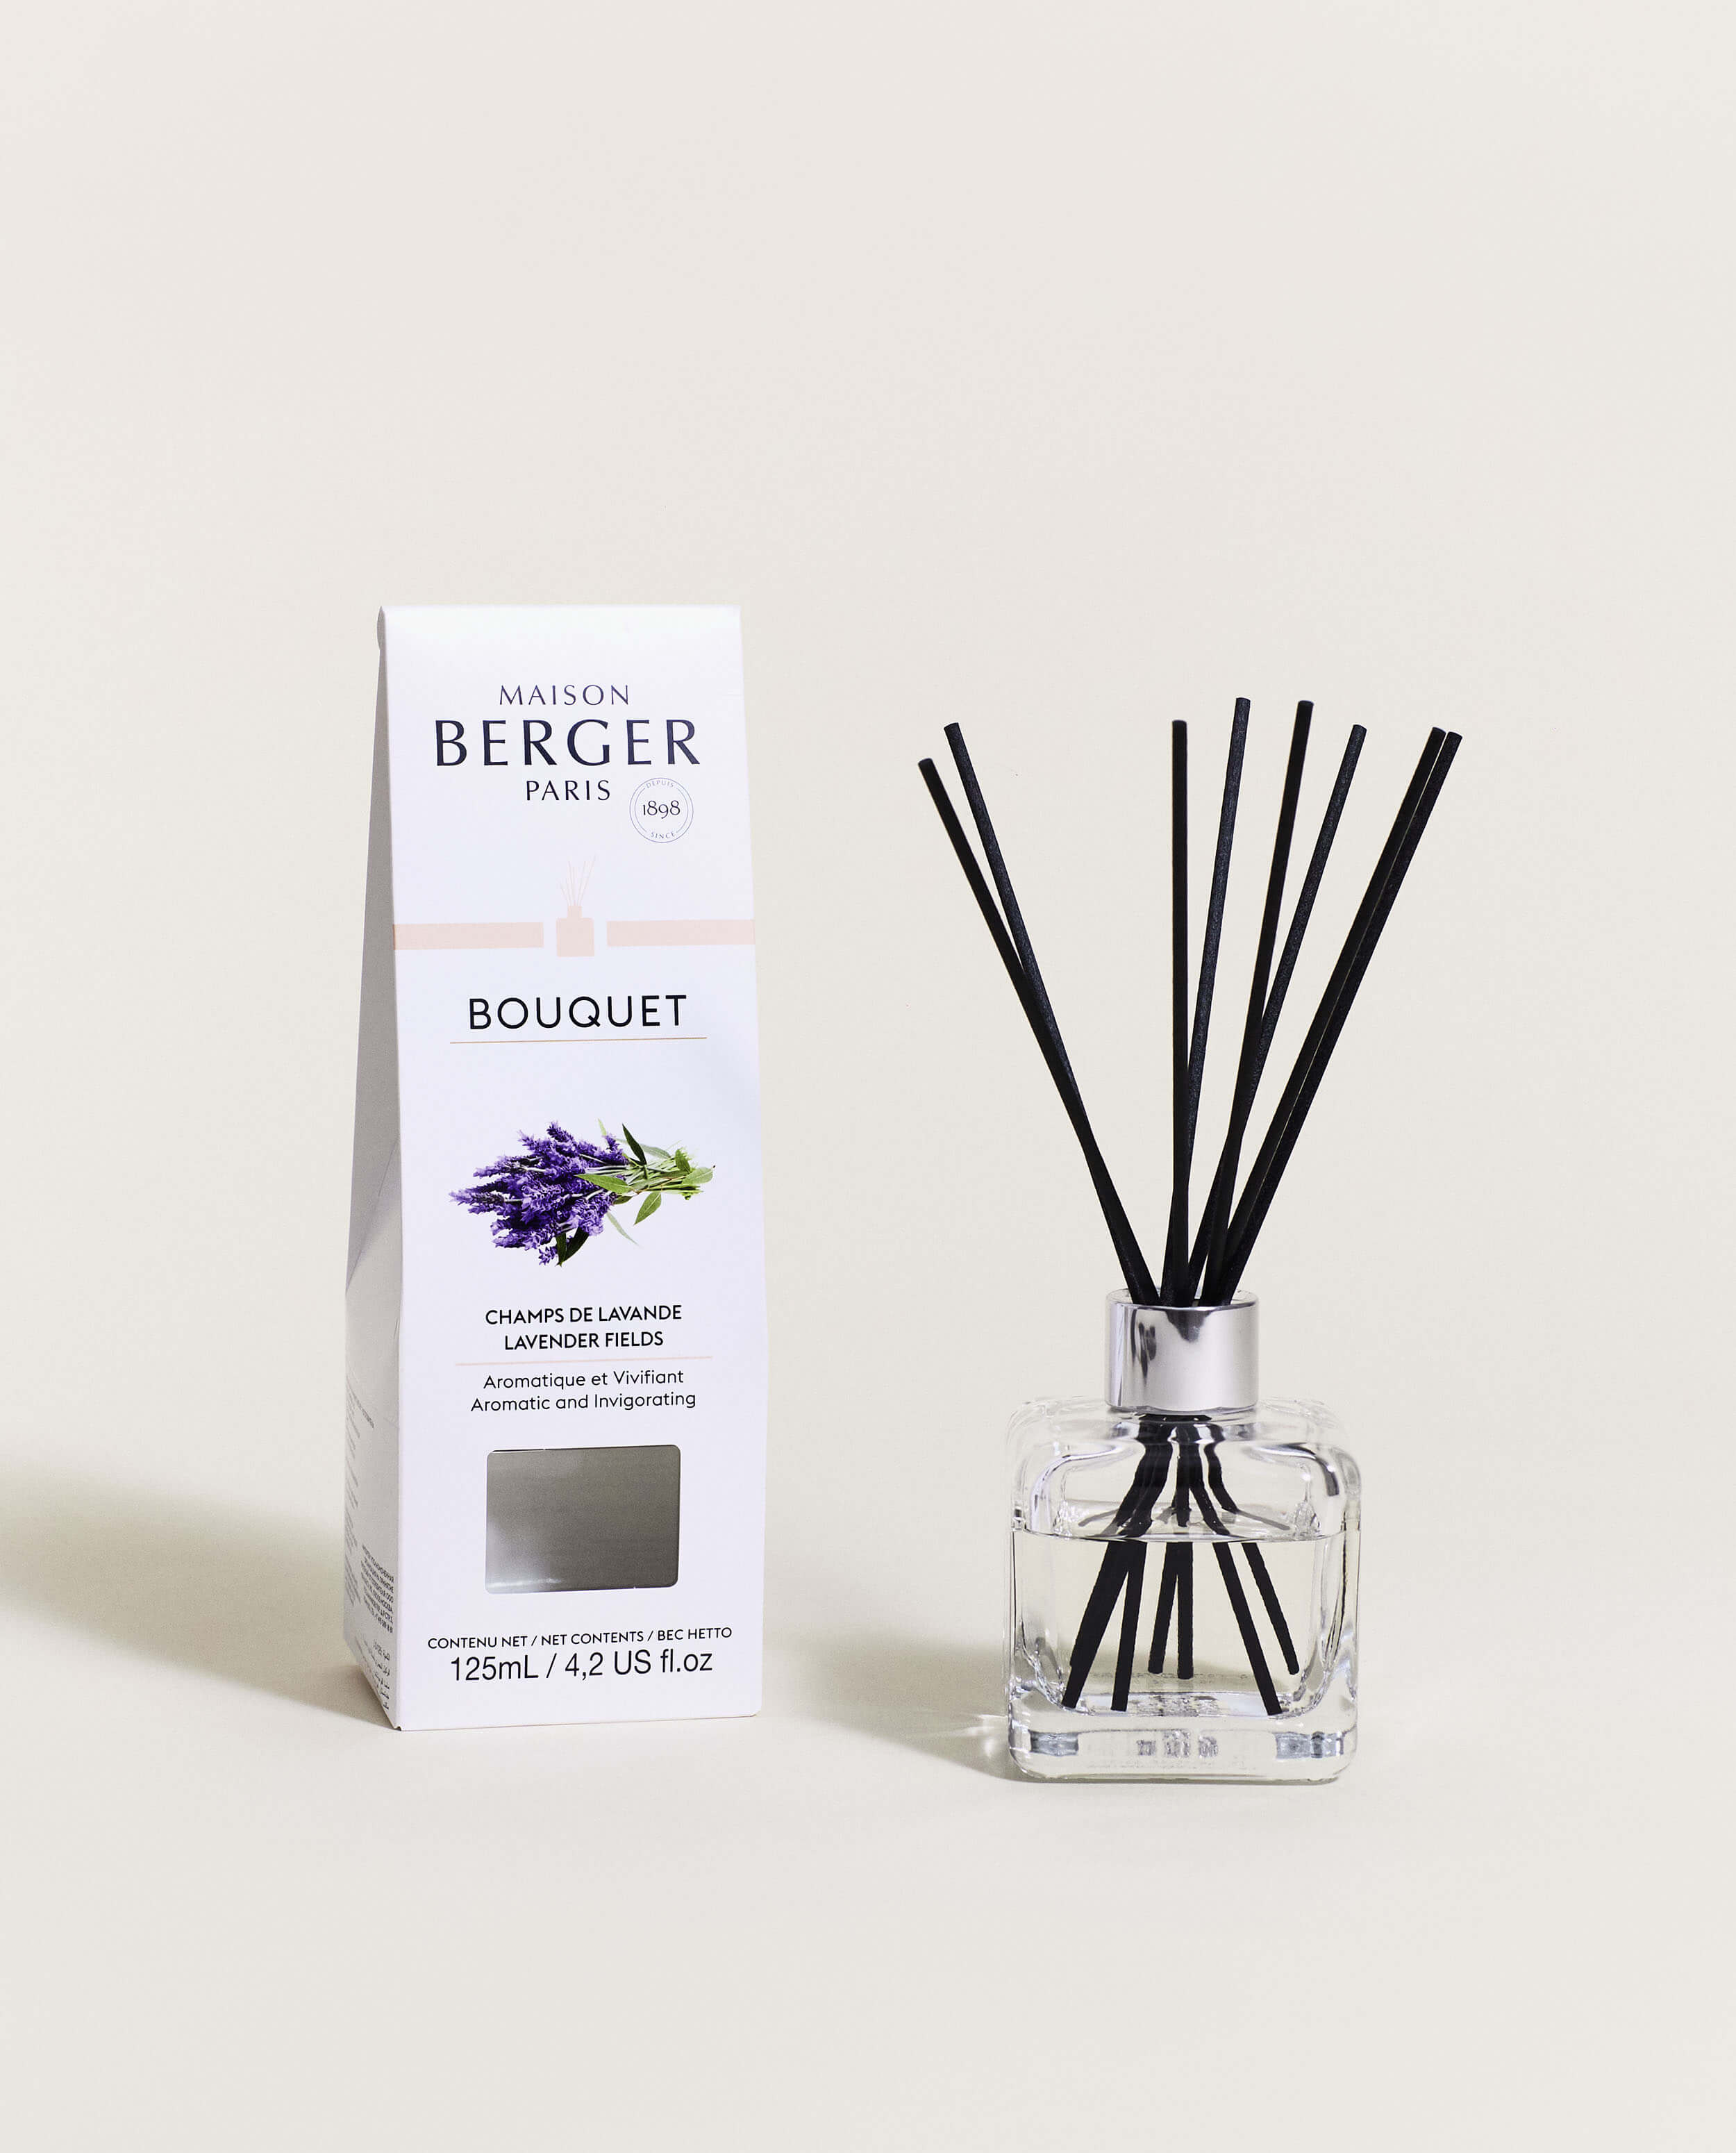 MAISON BERGER - Lampe Berger Gift Set Bingo - Clear - Home Fragrance  Diffuser - Perfuming - 10x8x6 inches - Made in France - Includes Fragrance  Ocean